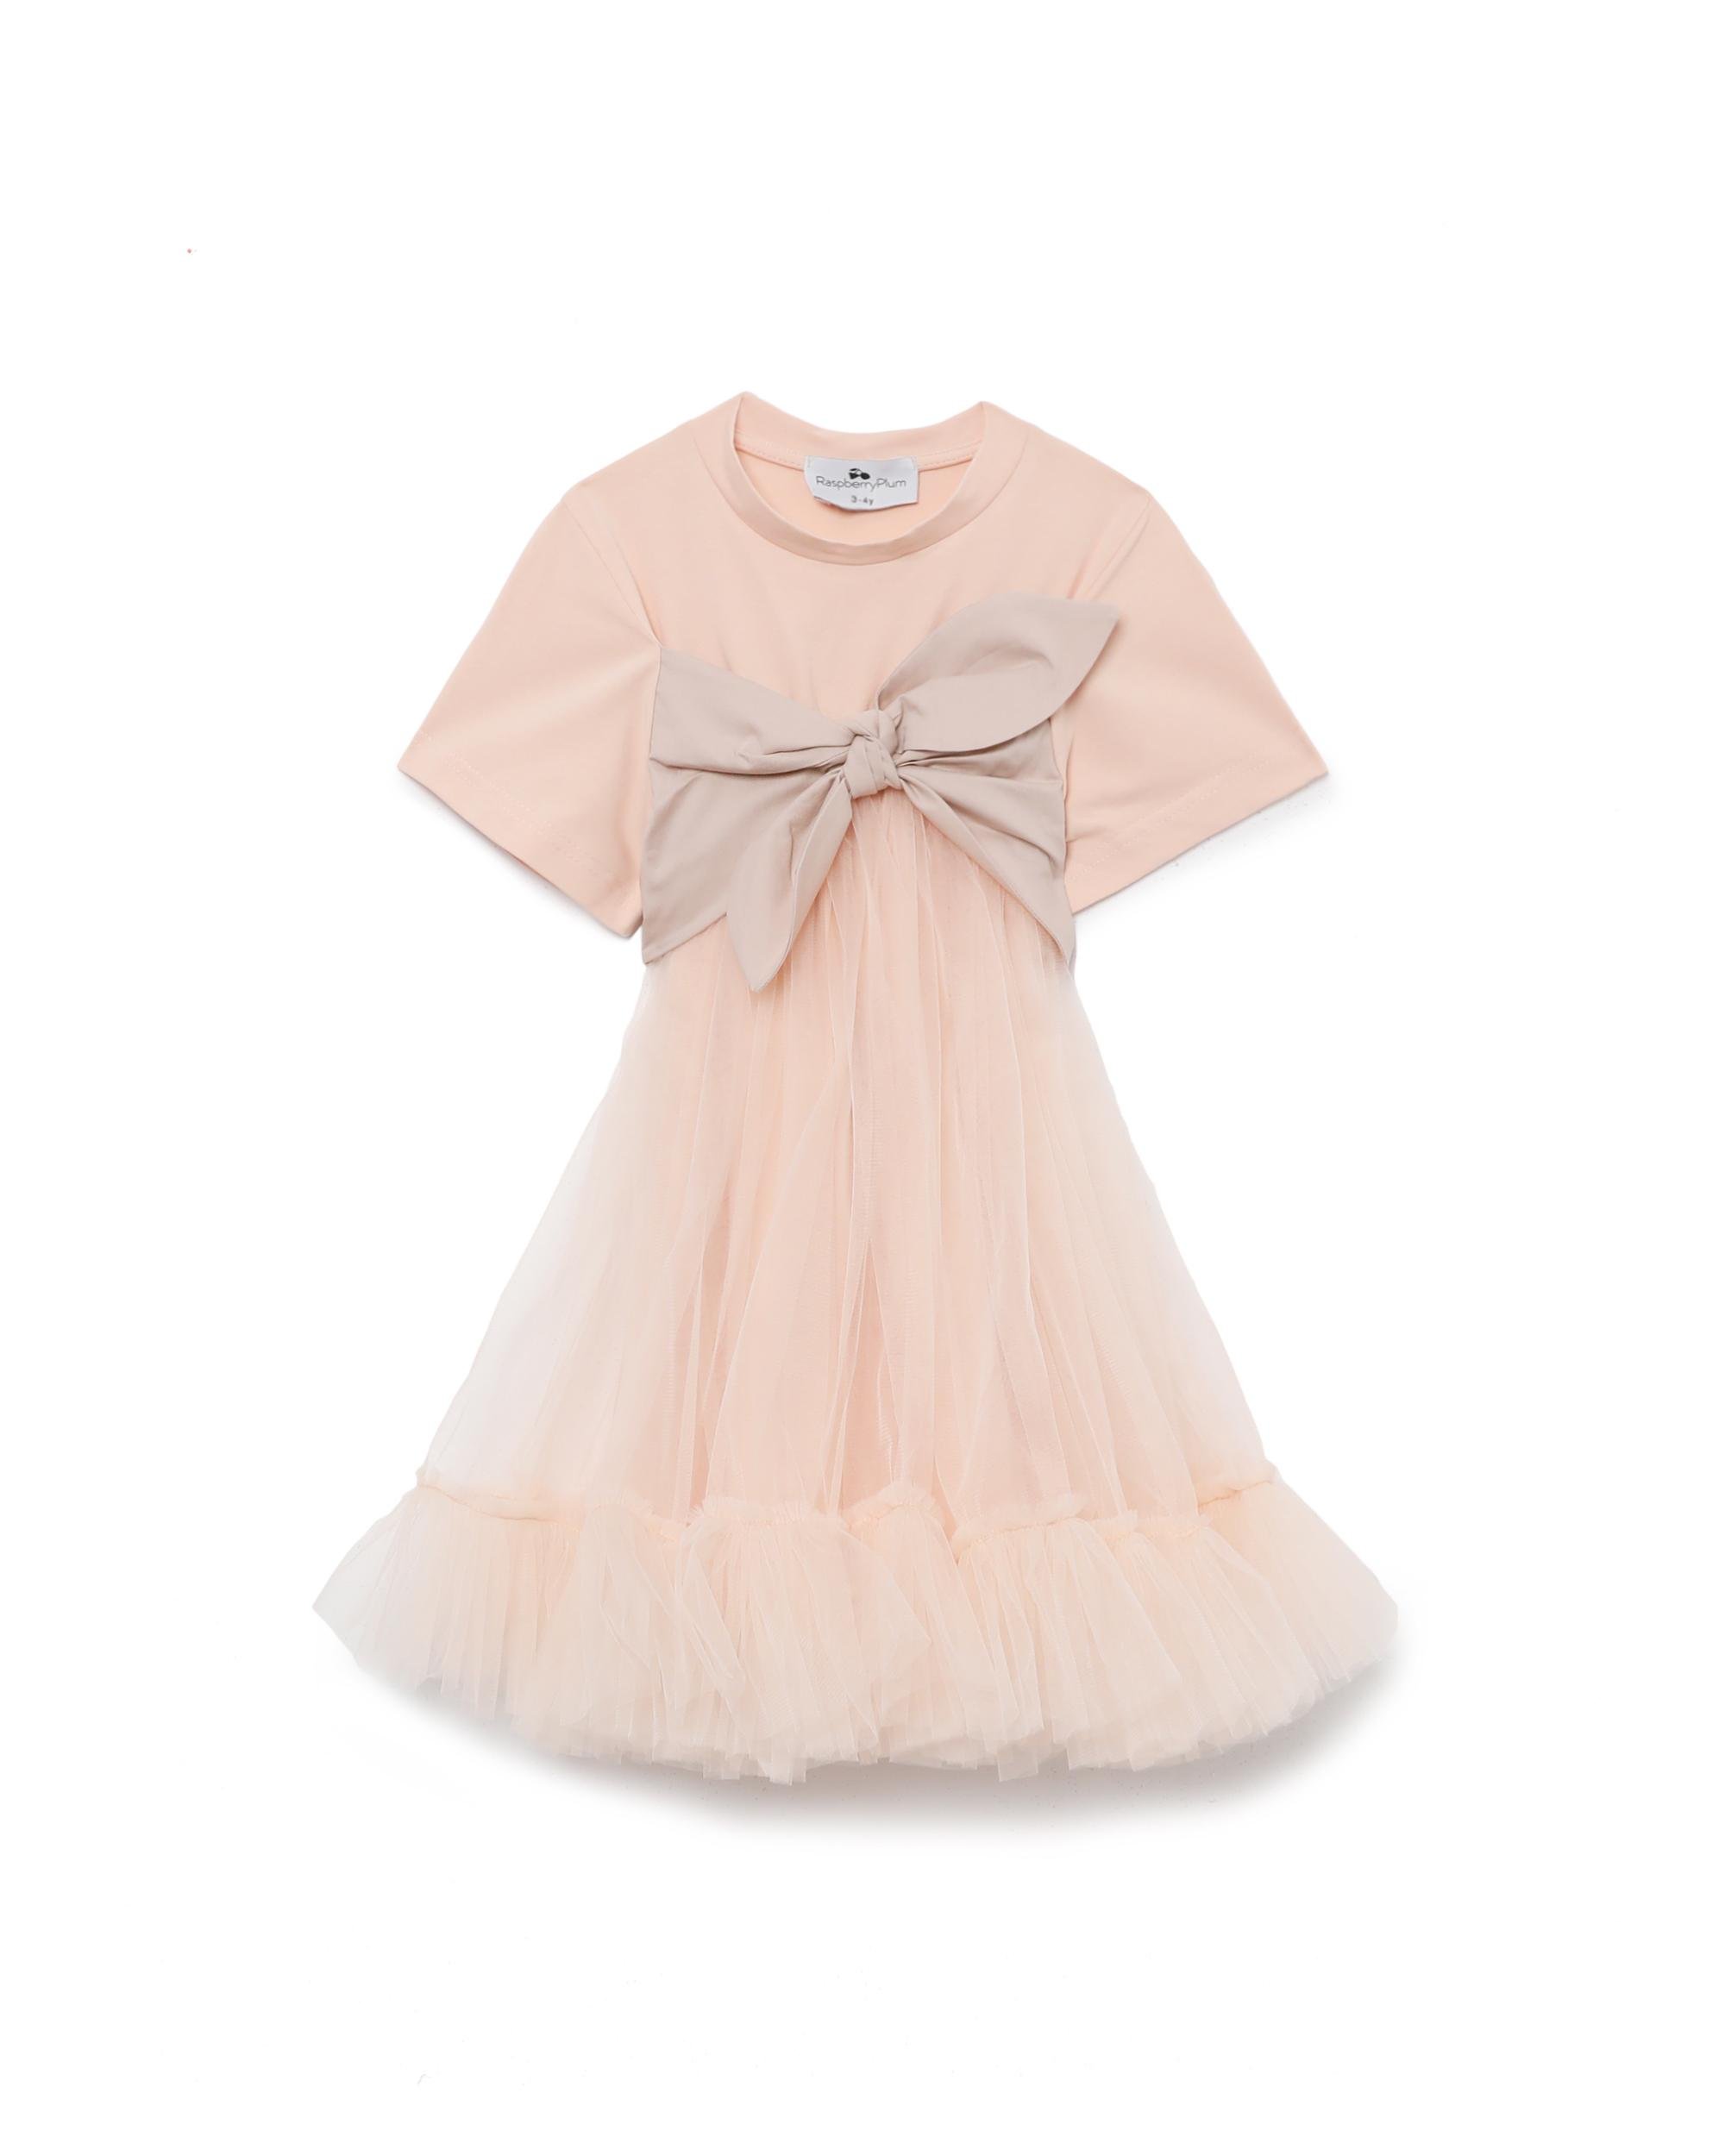 Kids knotted tulle dress by RASPBERRY PLUM